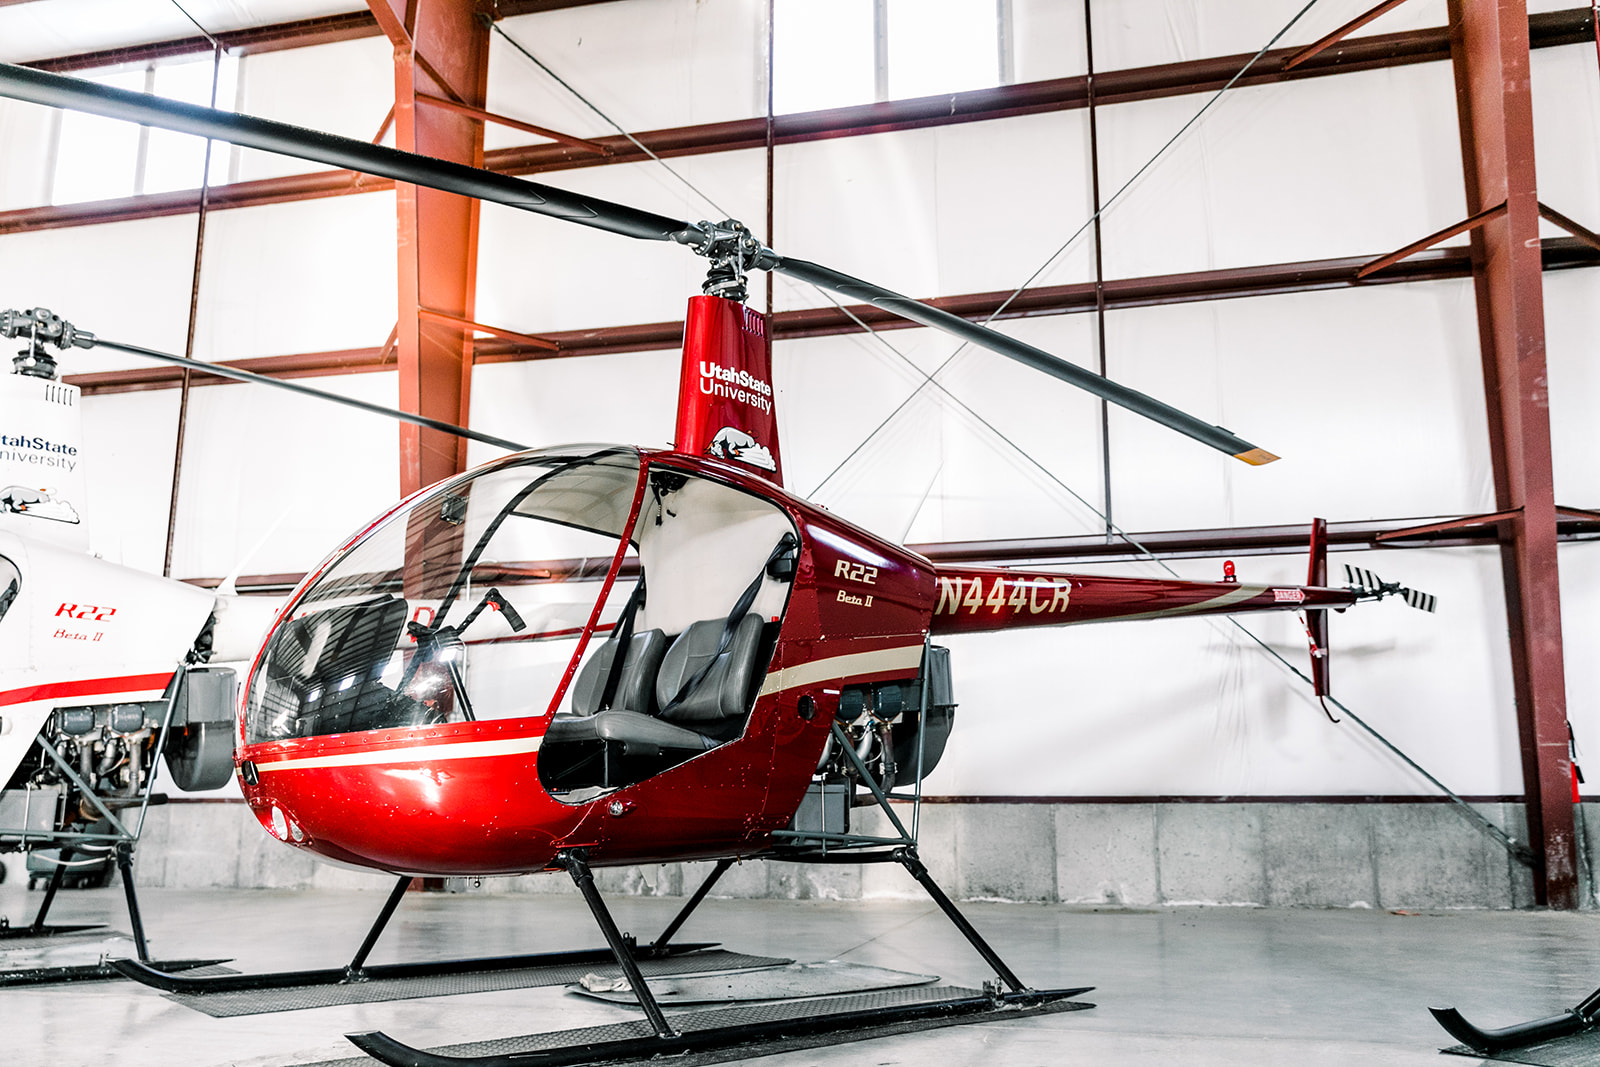 R22 Beta ll Helicopter